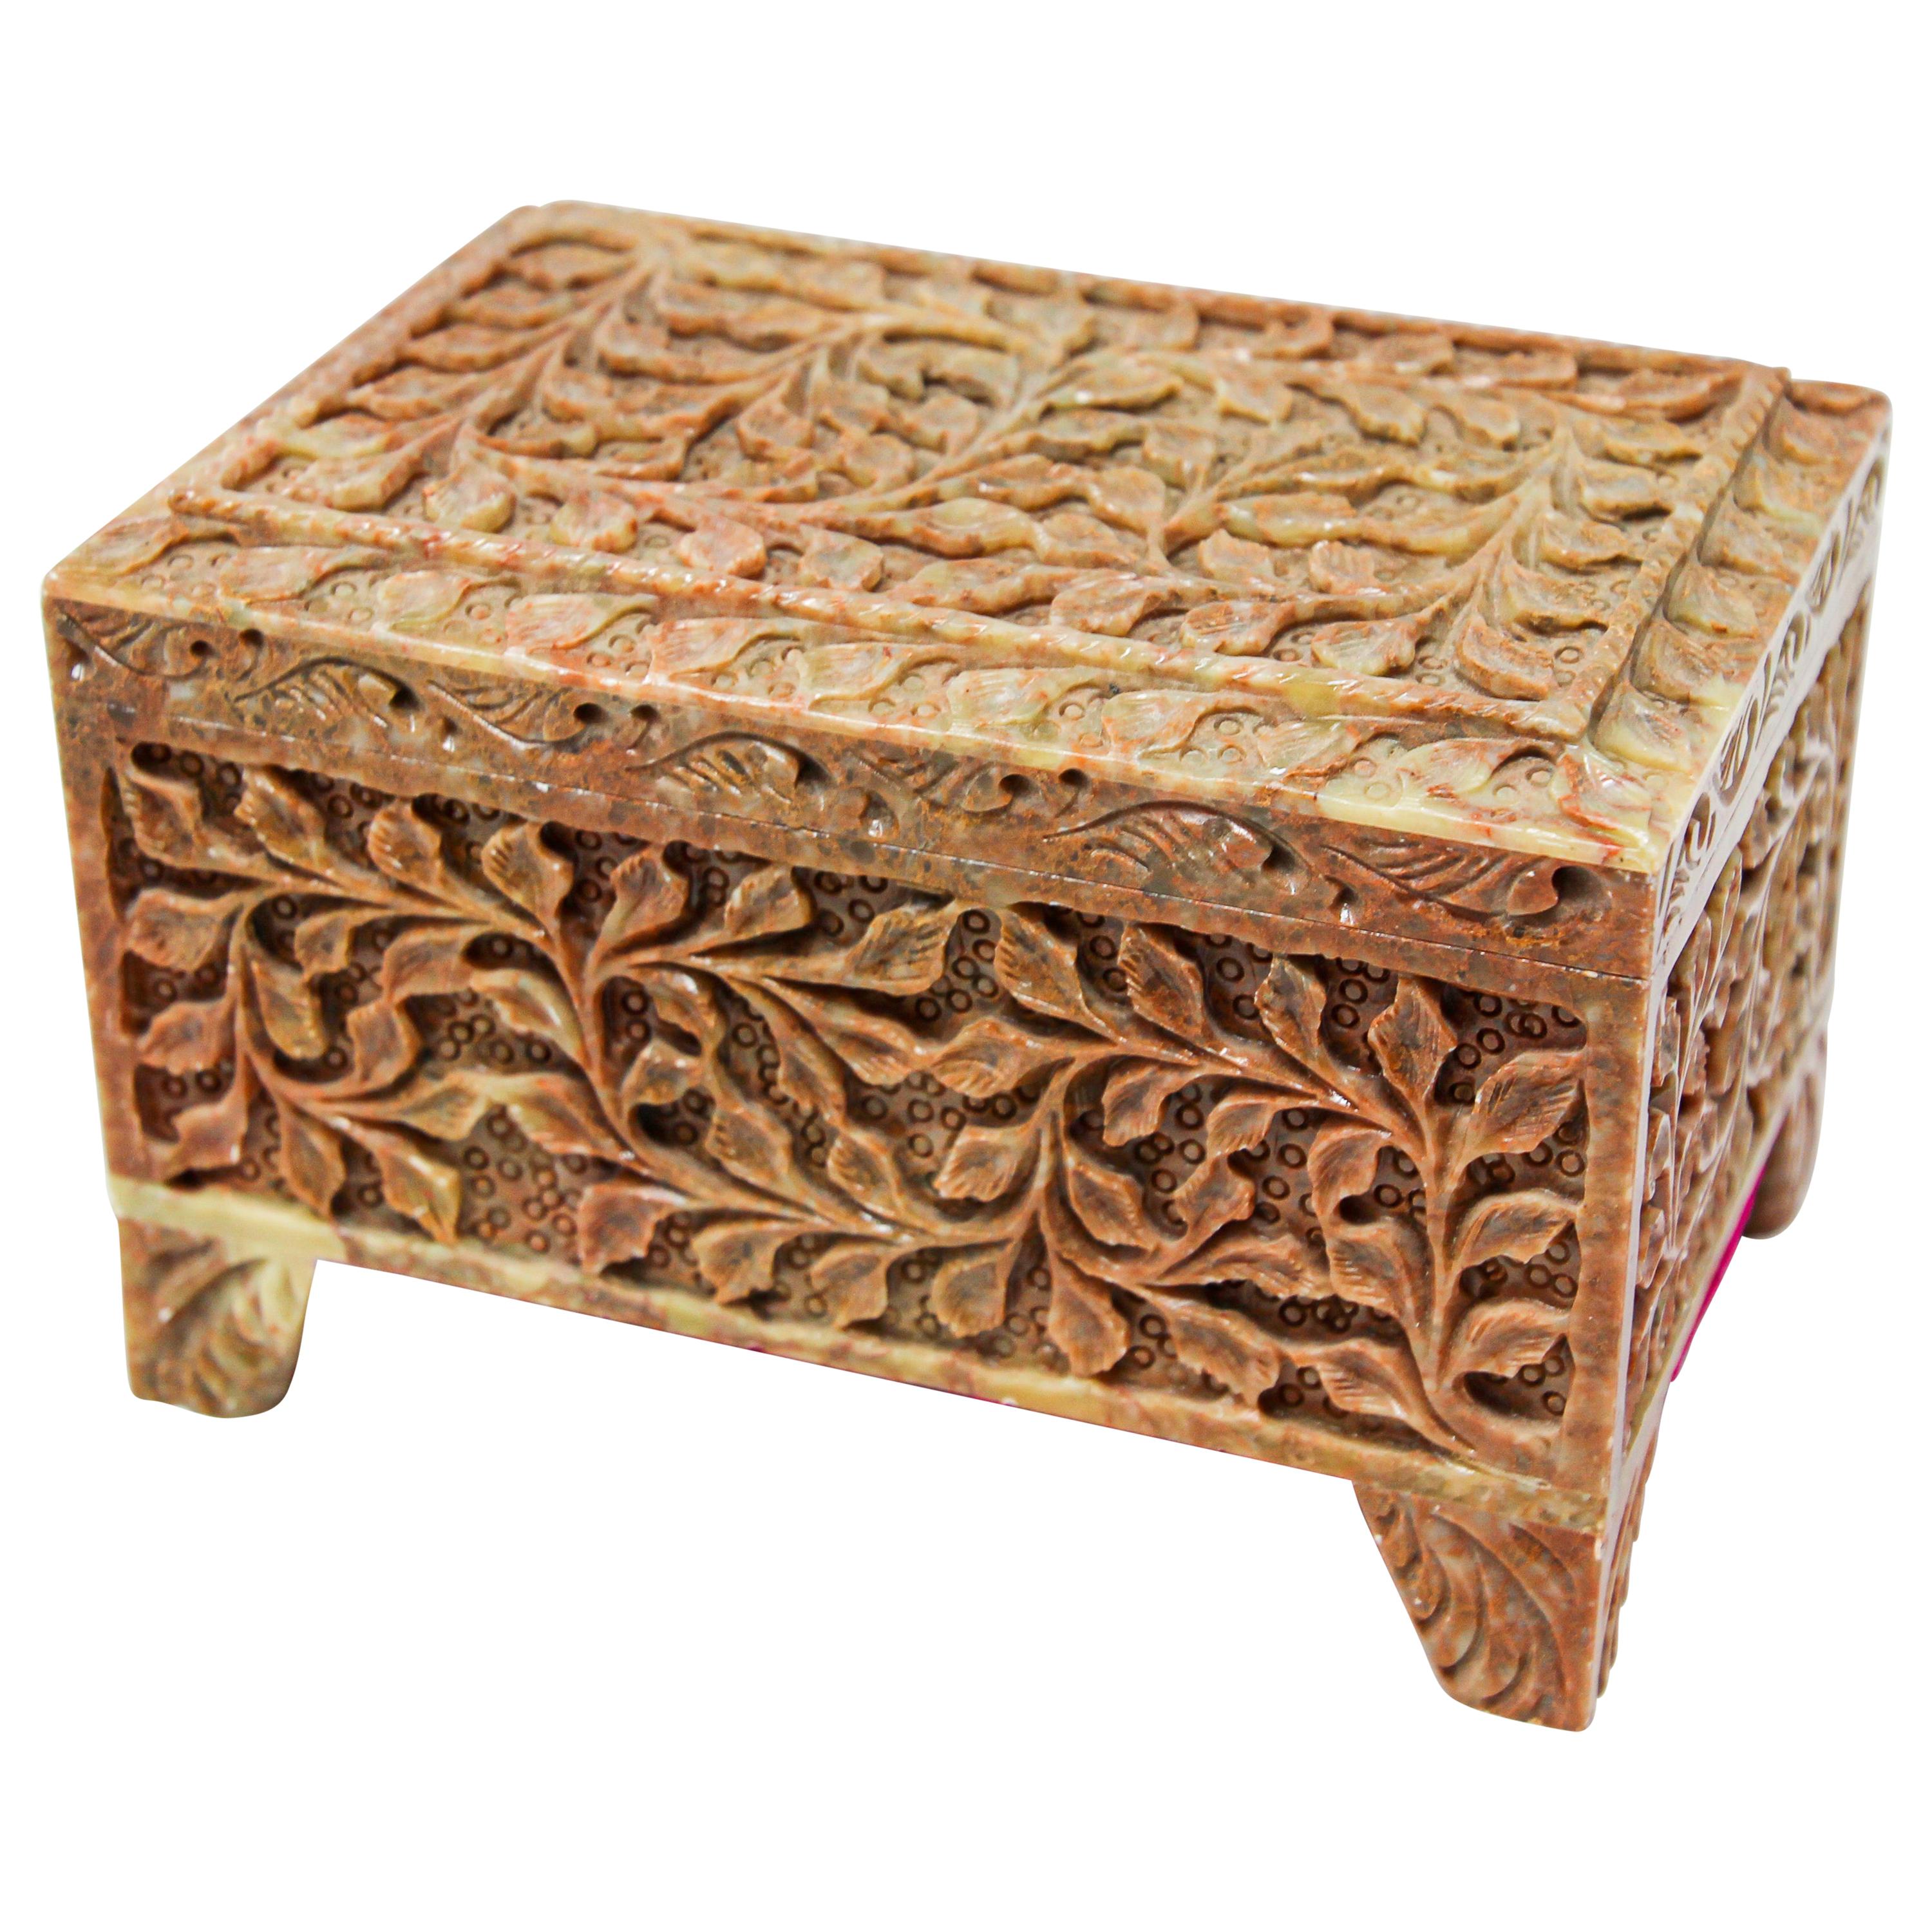 Hand-Carved Stone Jewelry Box Rajasthan, India